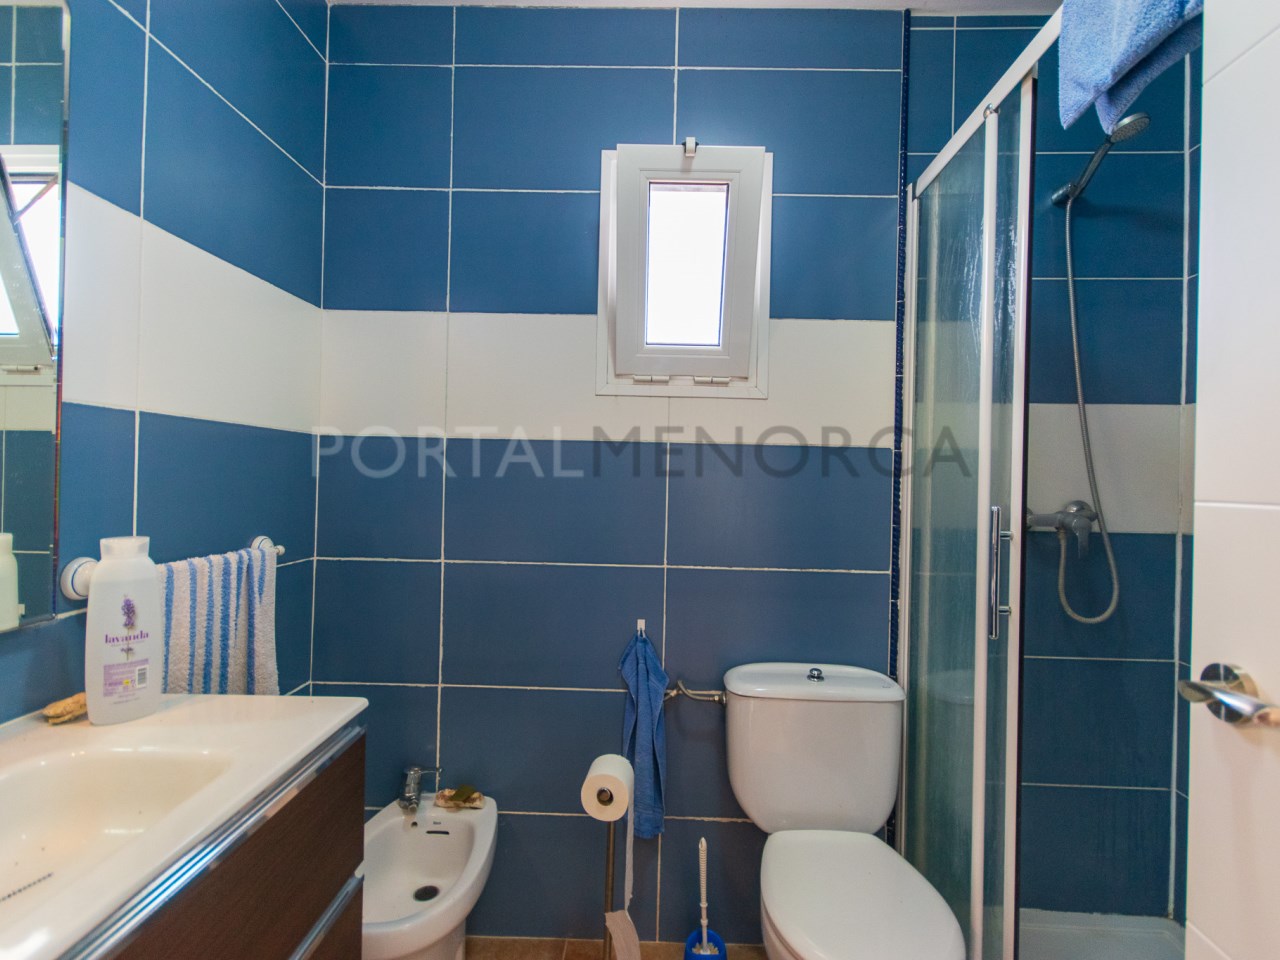 Bathroom Two Bedroom Townhouse for Sale in Cales Coves